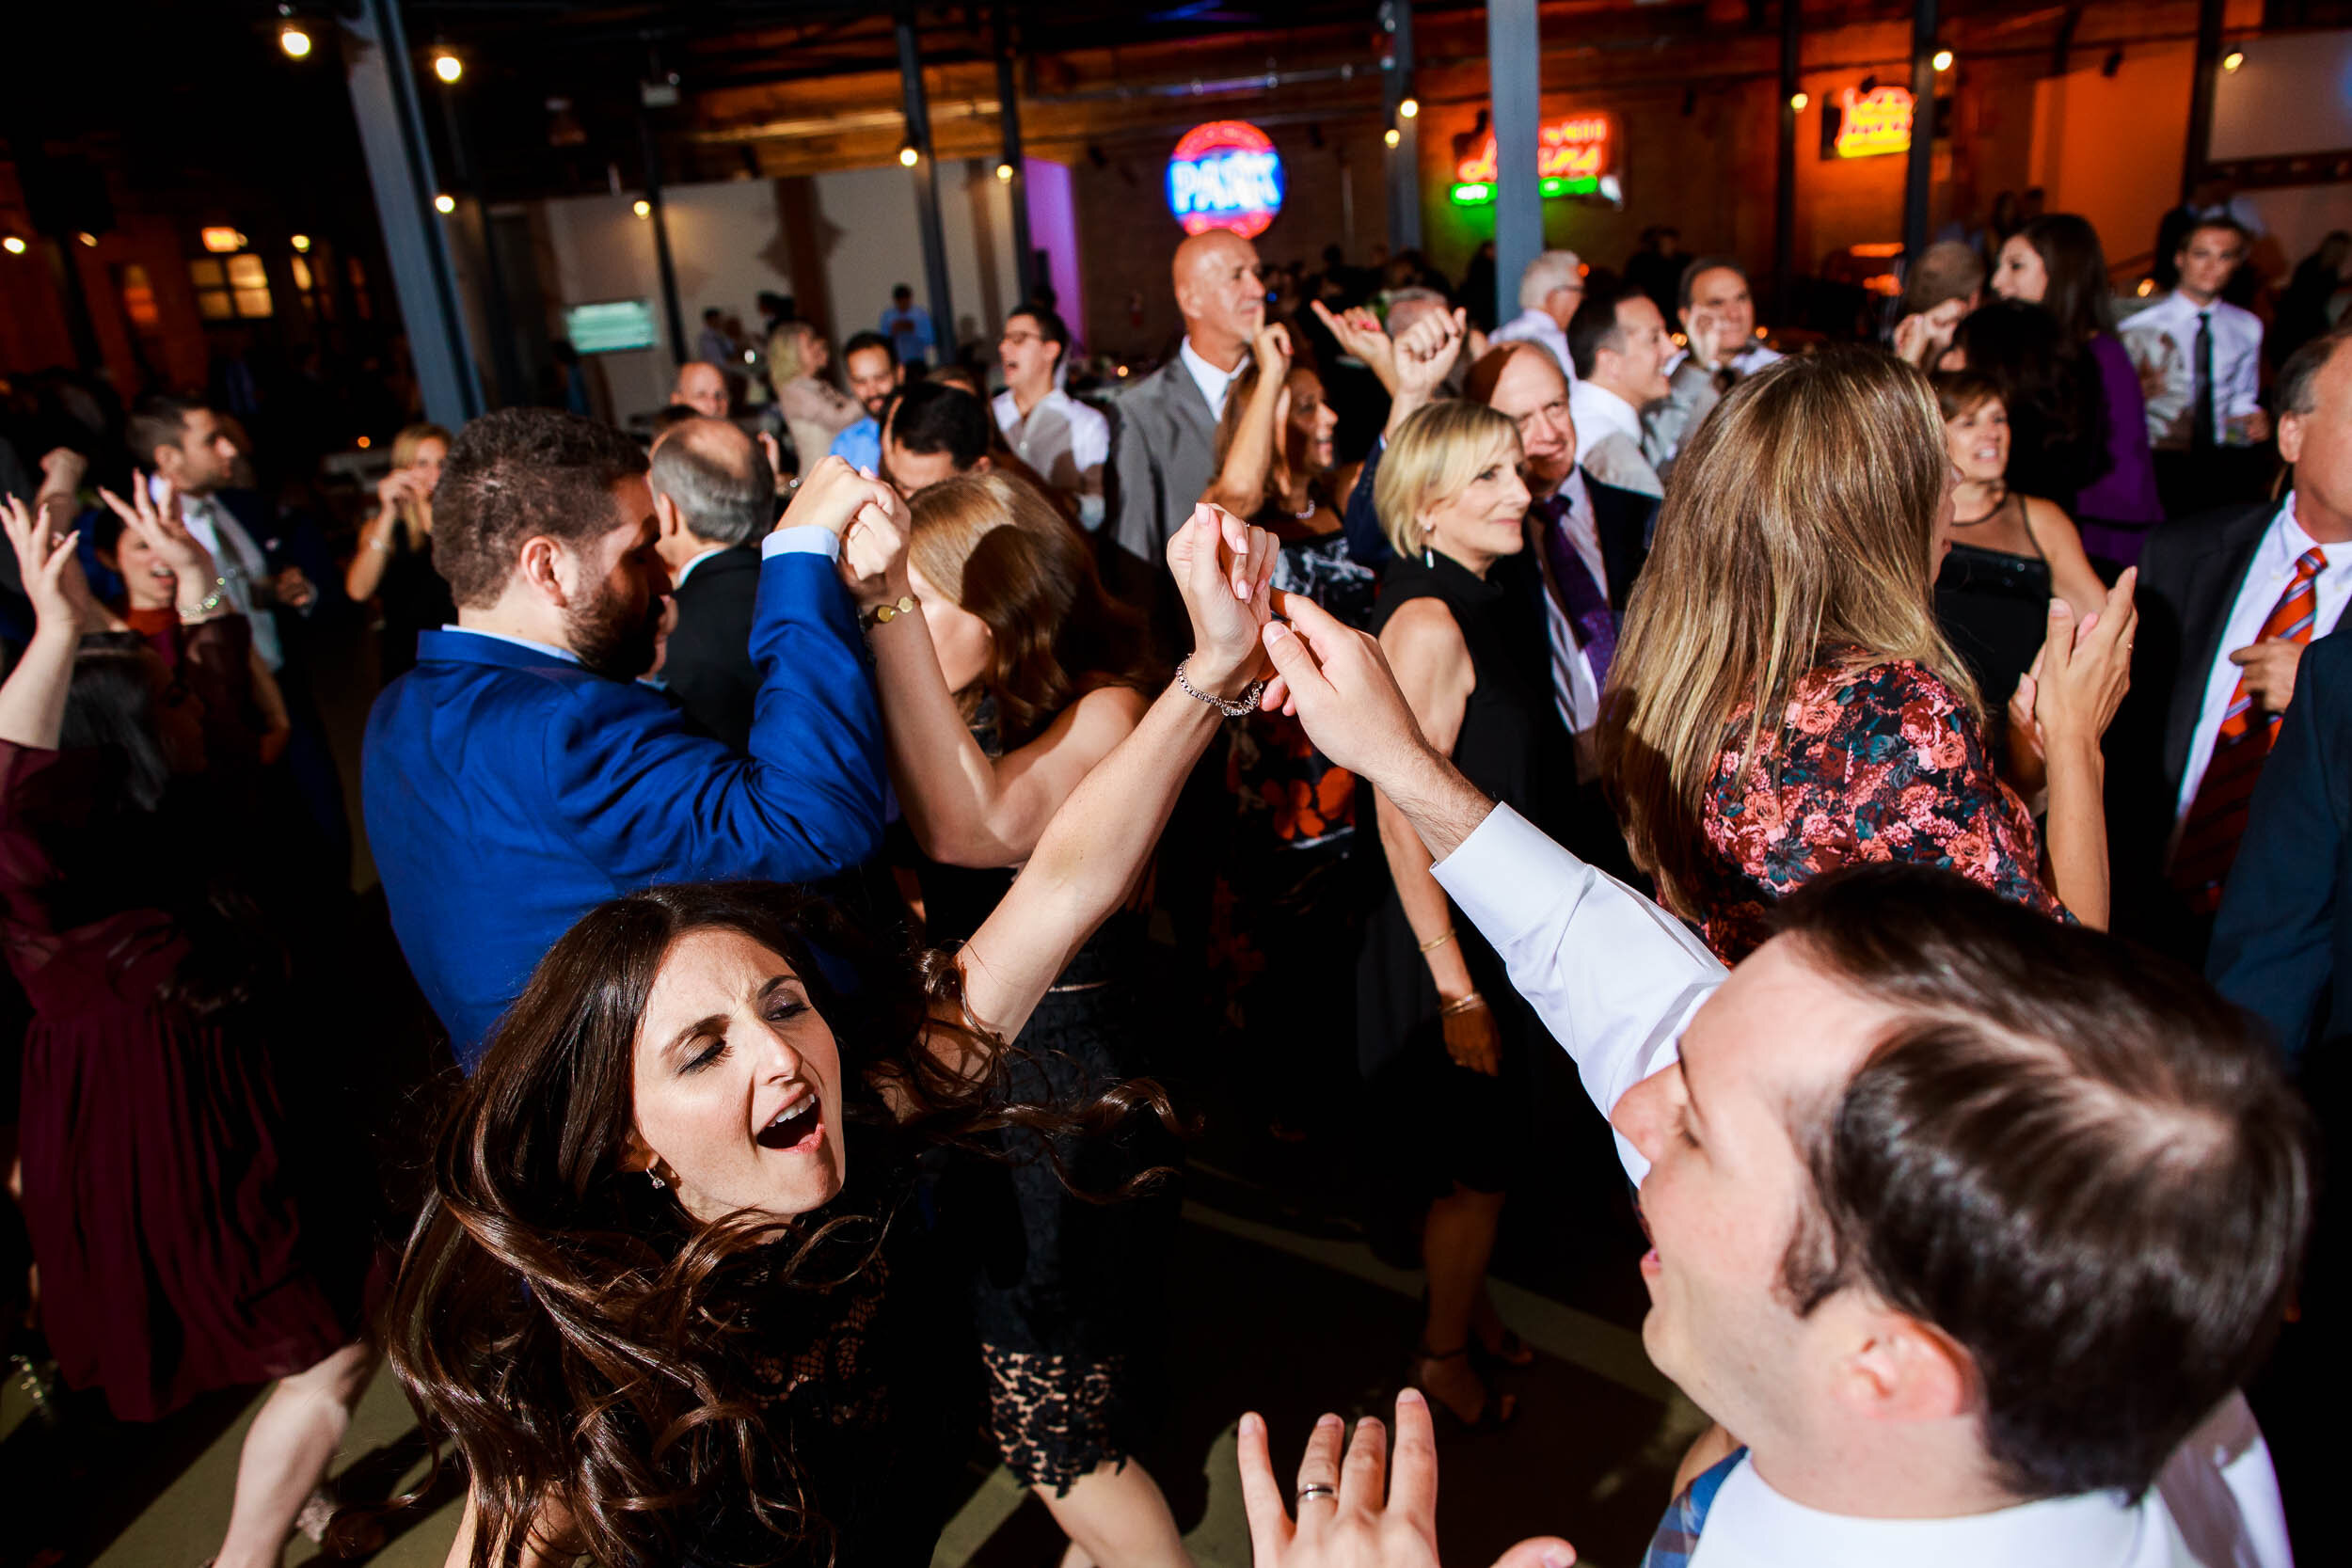 Packed dance floor during a wedding reception: Ravenswood Event Center Chicago wedding captured by J. Brown Photography.  